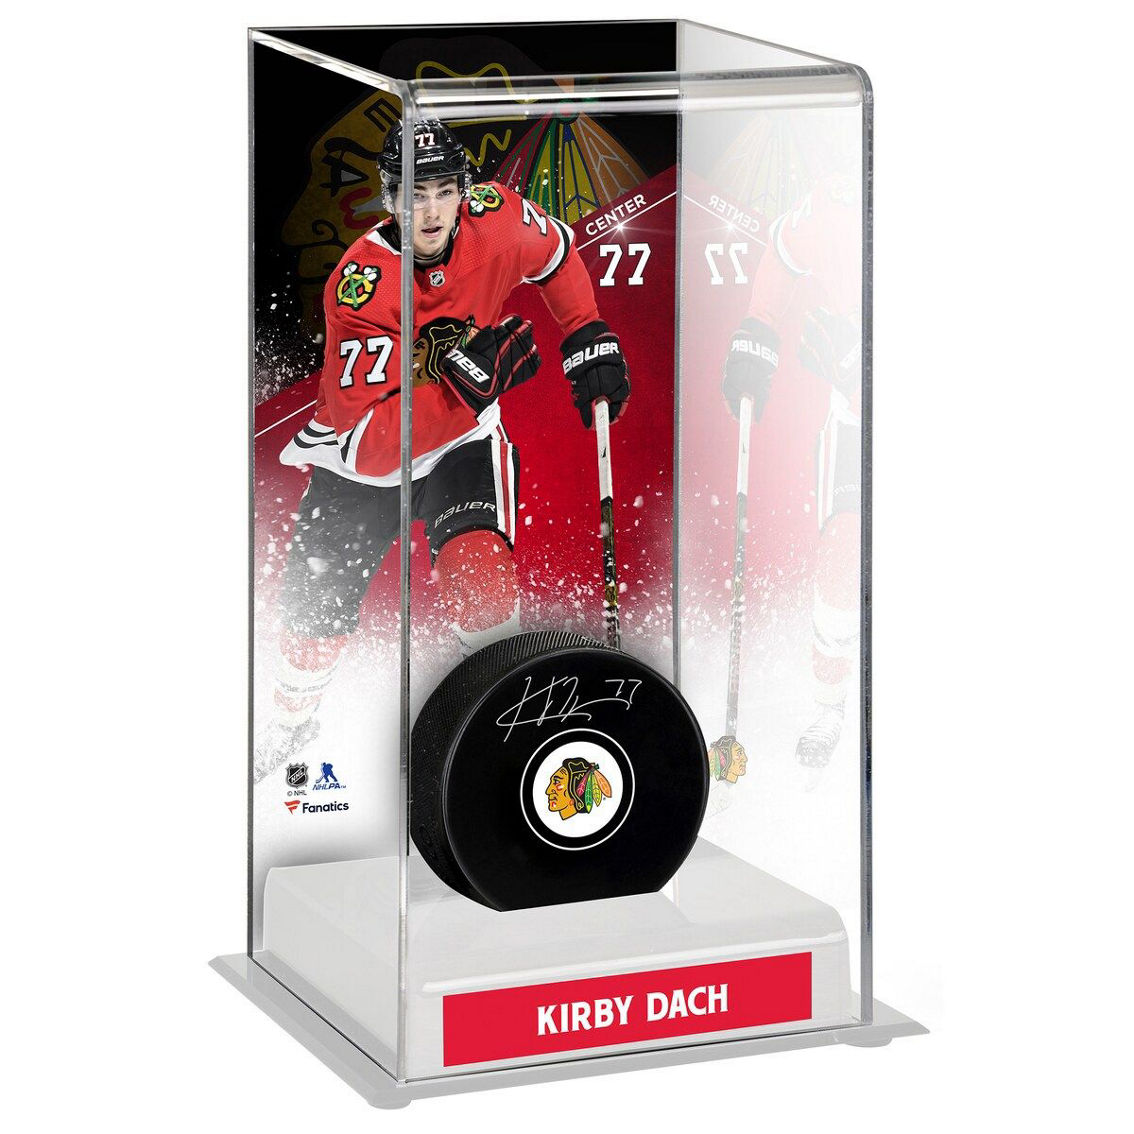 Fanatics Authentic Kirby Dach Chicago Blackhawks Autographed Puck with Deluxe Tall Hockey Puck Case - Image 2 of 2